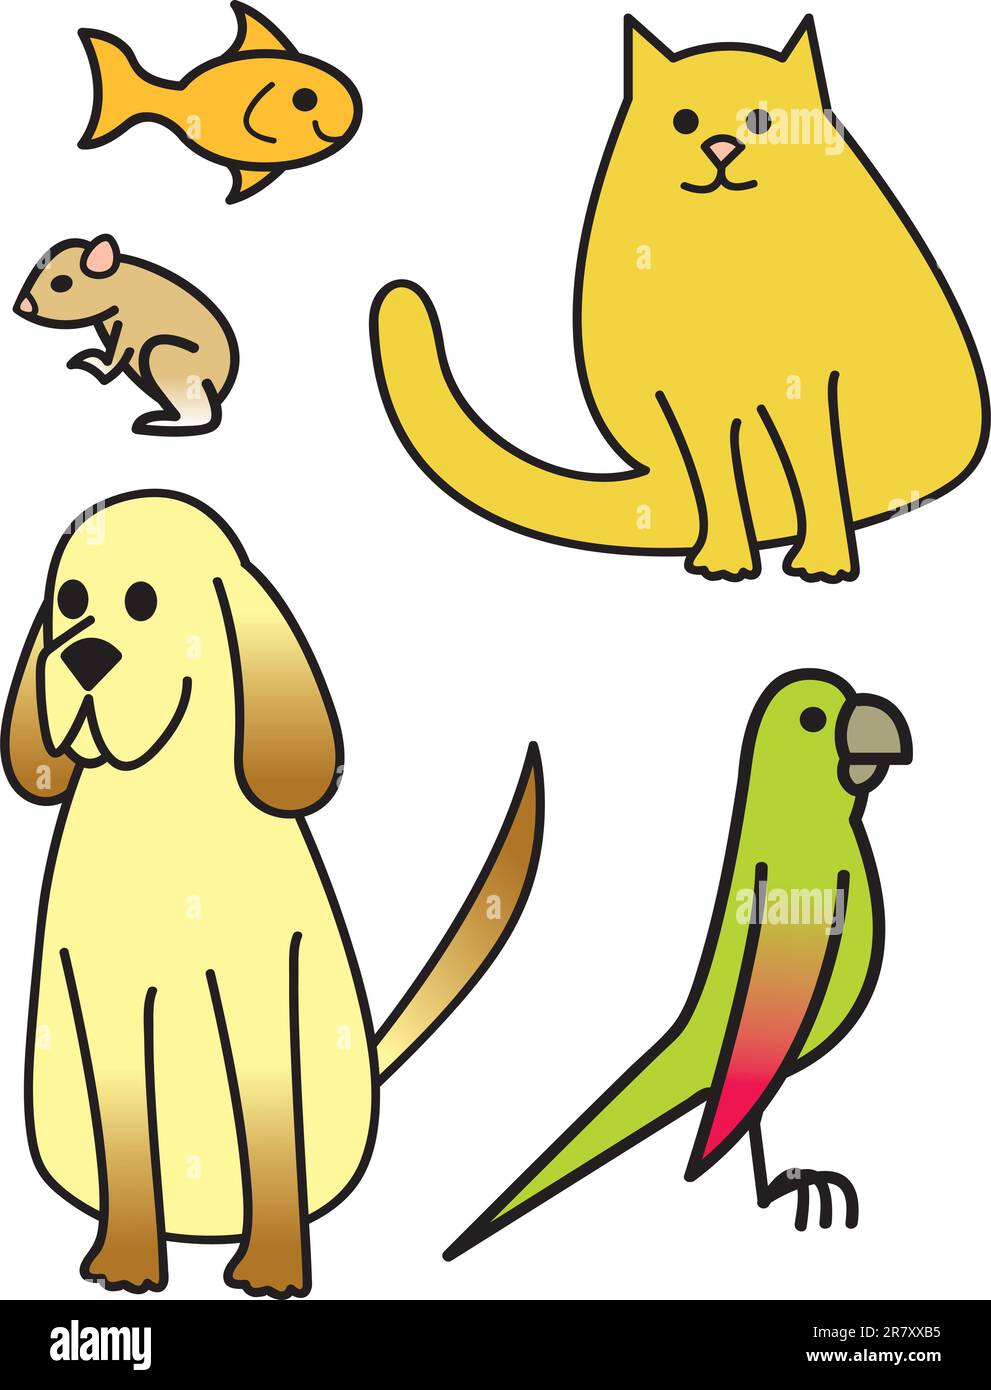 Five common house pets drawn in a cartoon style. Stock Vector